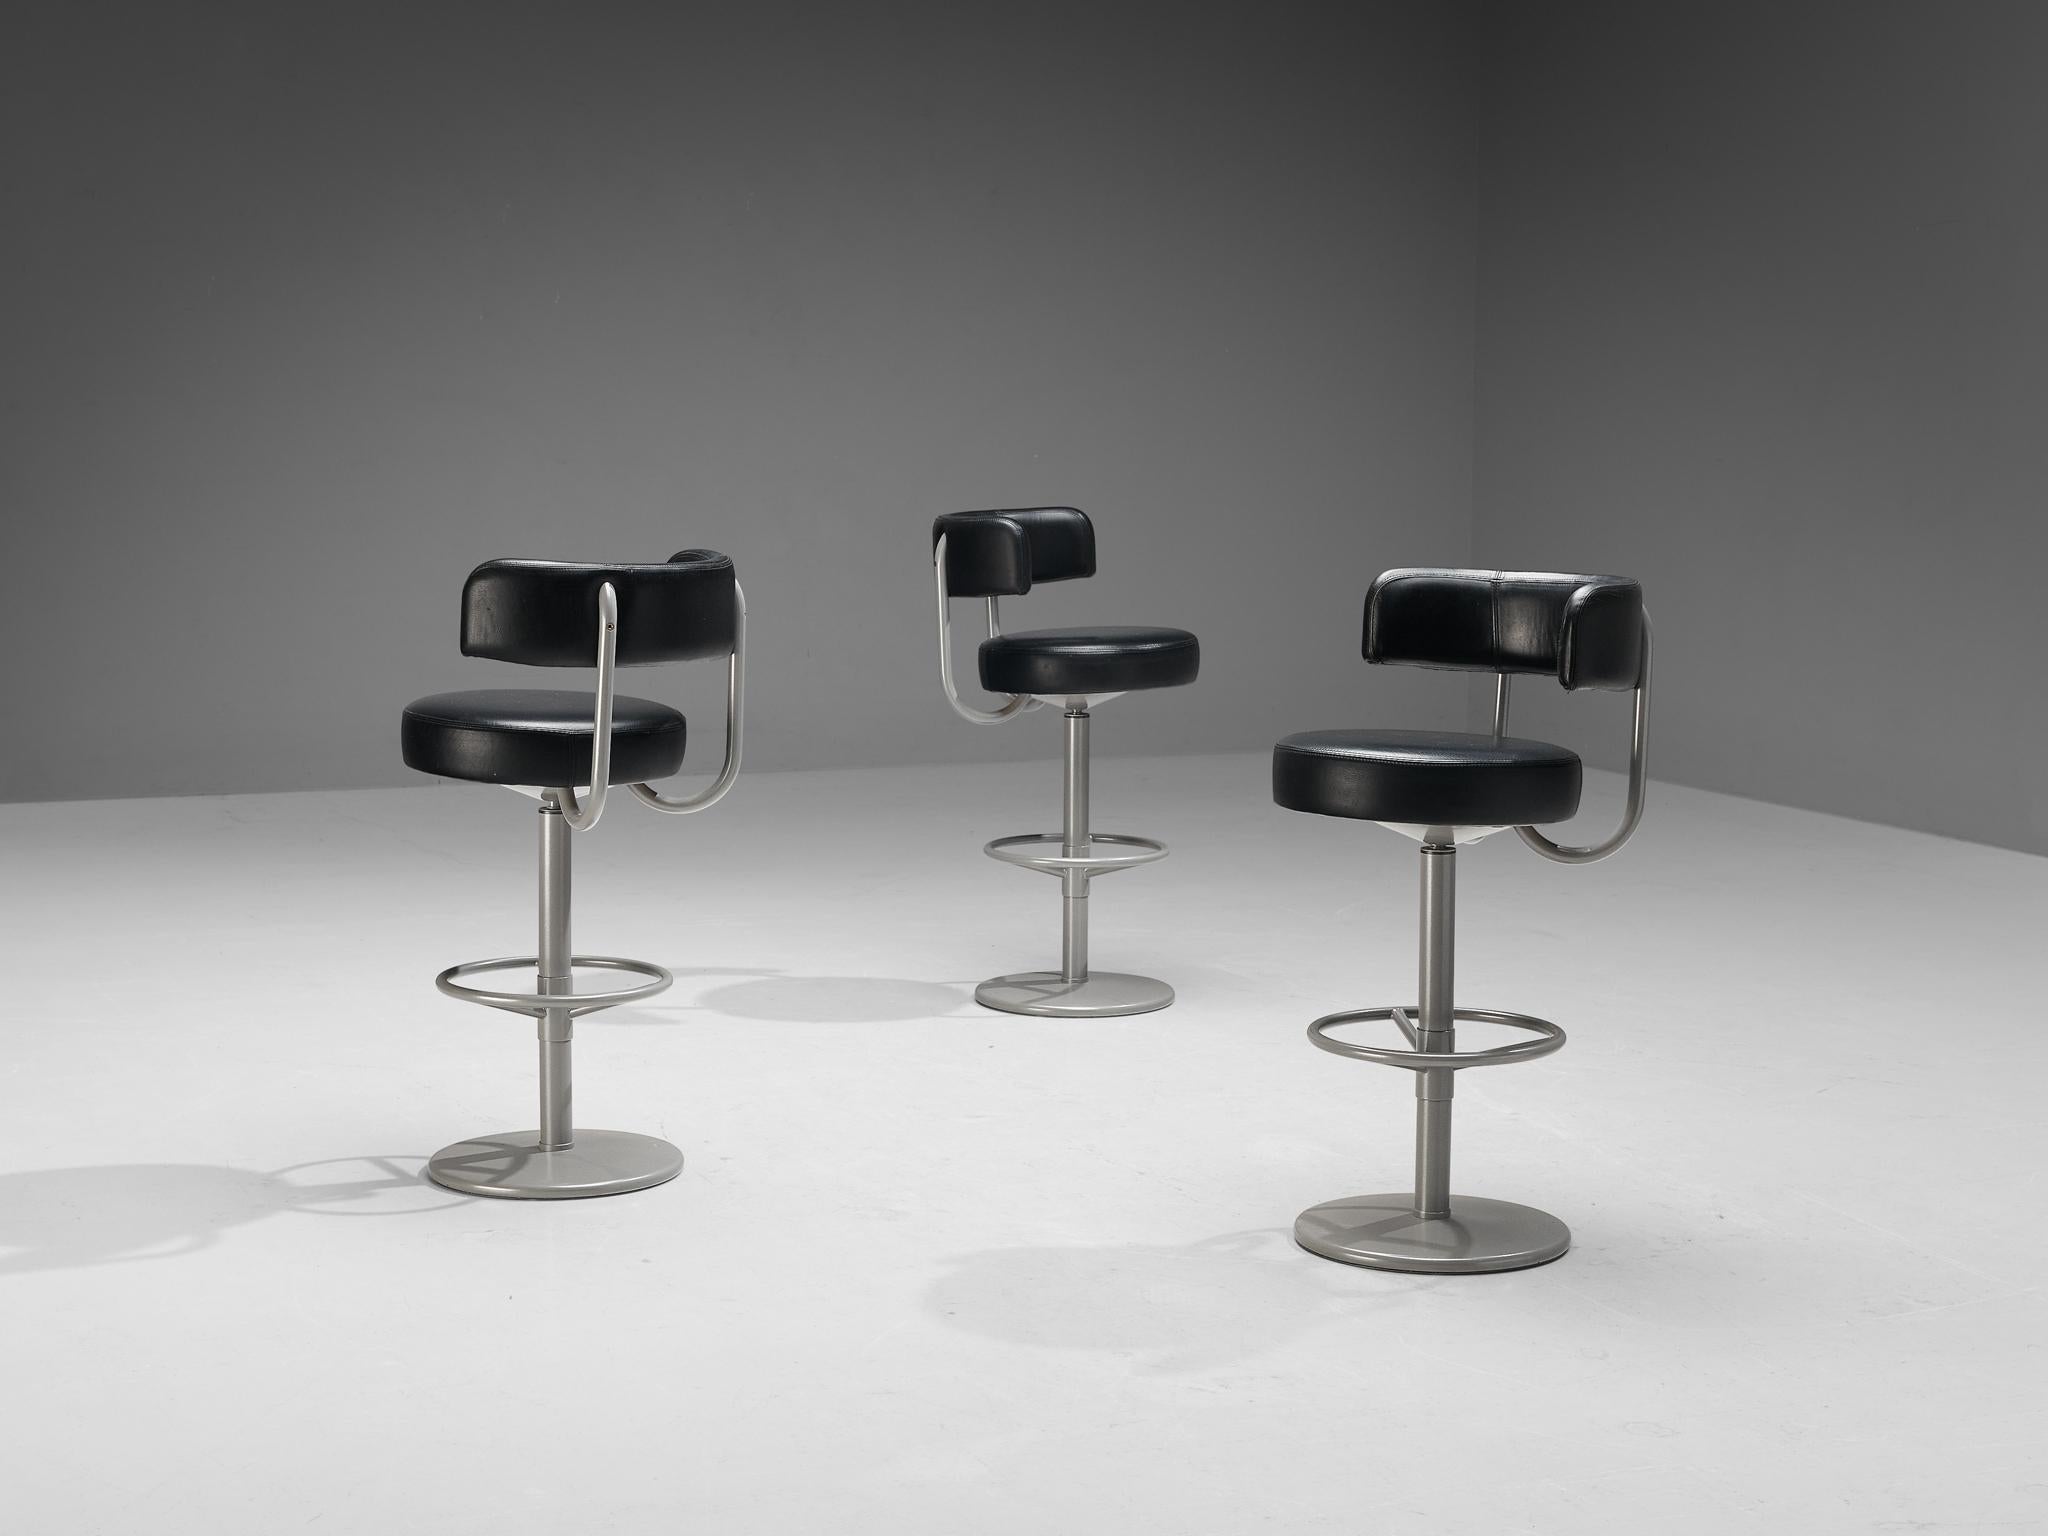 Börje Johanson for Johanson Design, set of three barstools as part of 'Johanson Jupiter Collection', metal, leatherette, Sweden, 1970s.

Highly comfortable high barstools in black leatherette upholstery. Due to the solid seat and back, these chairs